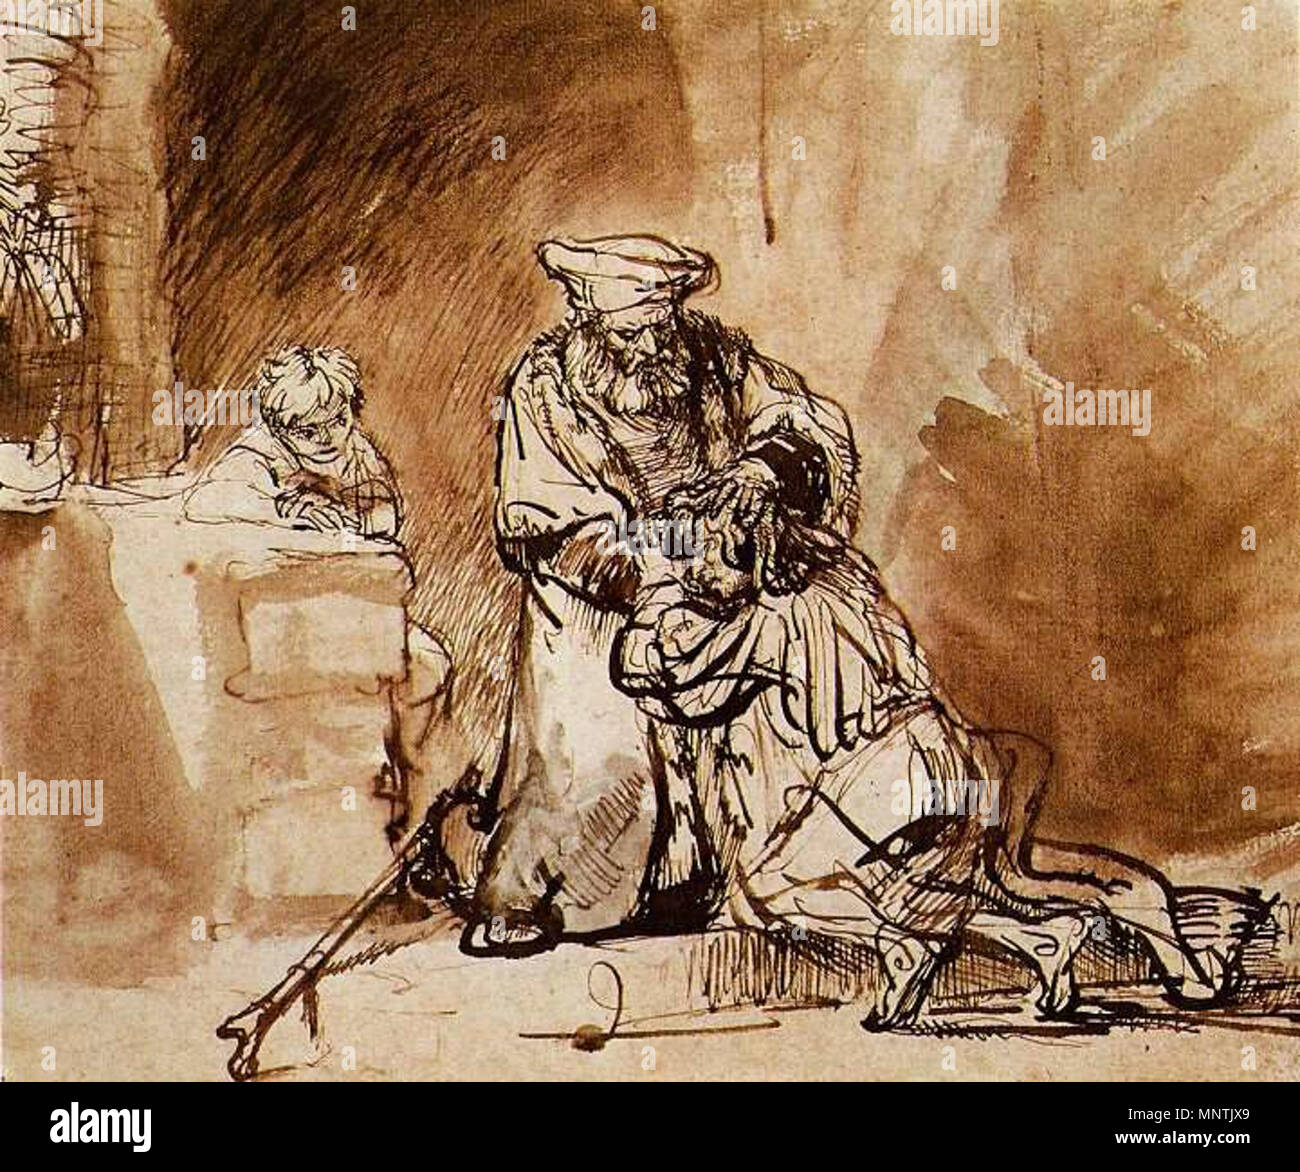 . Rembrandt Harmensz. van Rijn 1606 – 1669 The Return of the Prodigal Son (1642) drawing with pen and brush (19 × 23 cm) — ca. 1642 Teylers Museum, Haarlem . 1642.   Rembrandt  (1606–1669)       Alternative names Rembrandt van Rijn, Birth name: Rembrandt Harmenszoon van Rijn, Rembrandt Harmensz. van Rijn  Description Dutch painter, printmaker and draughtsman  Date of birth/death 15 July 1606 4 October 1669  Location of birth/death Leiden Amsterdam  Work period between circa 1625 and circa 1669  Work location Leiden (1620-1624), Amsterdam (1624-1625), Leiden (1625-1633), Amsterdam (1631-1669)   Stock Photo